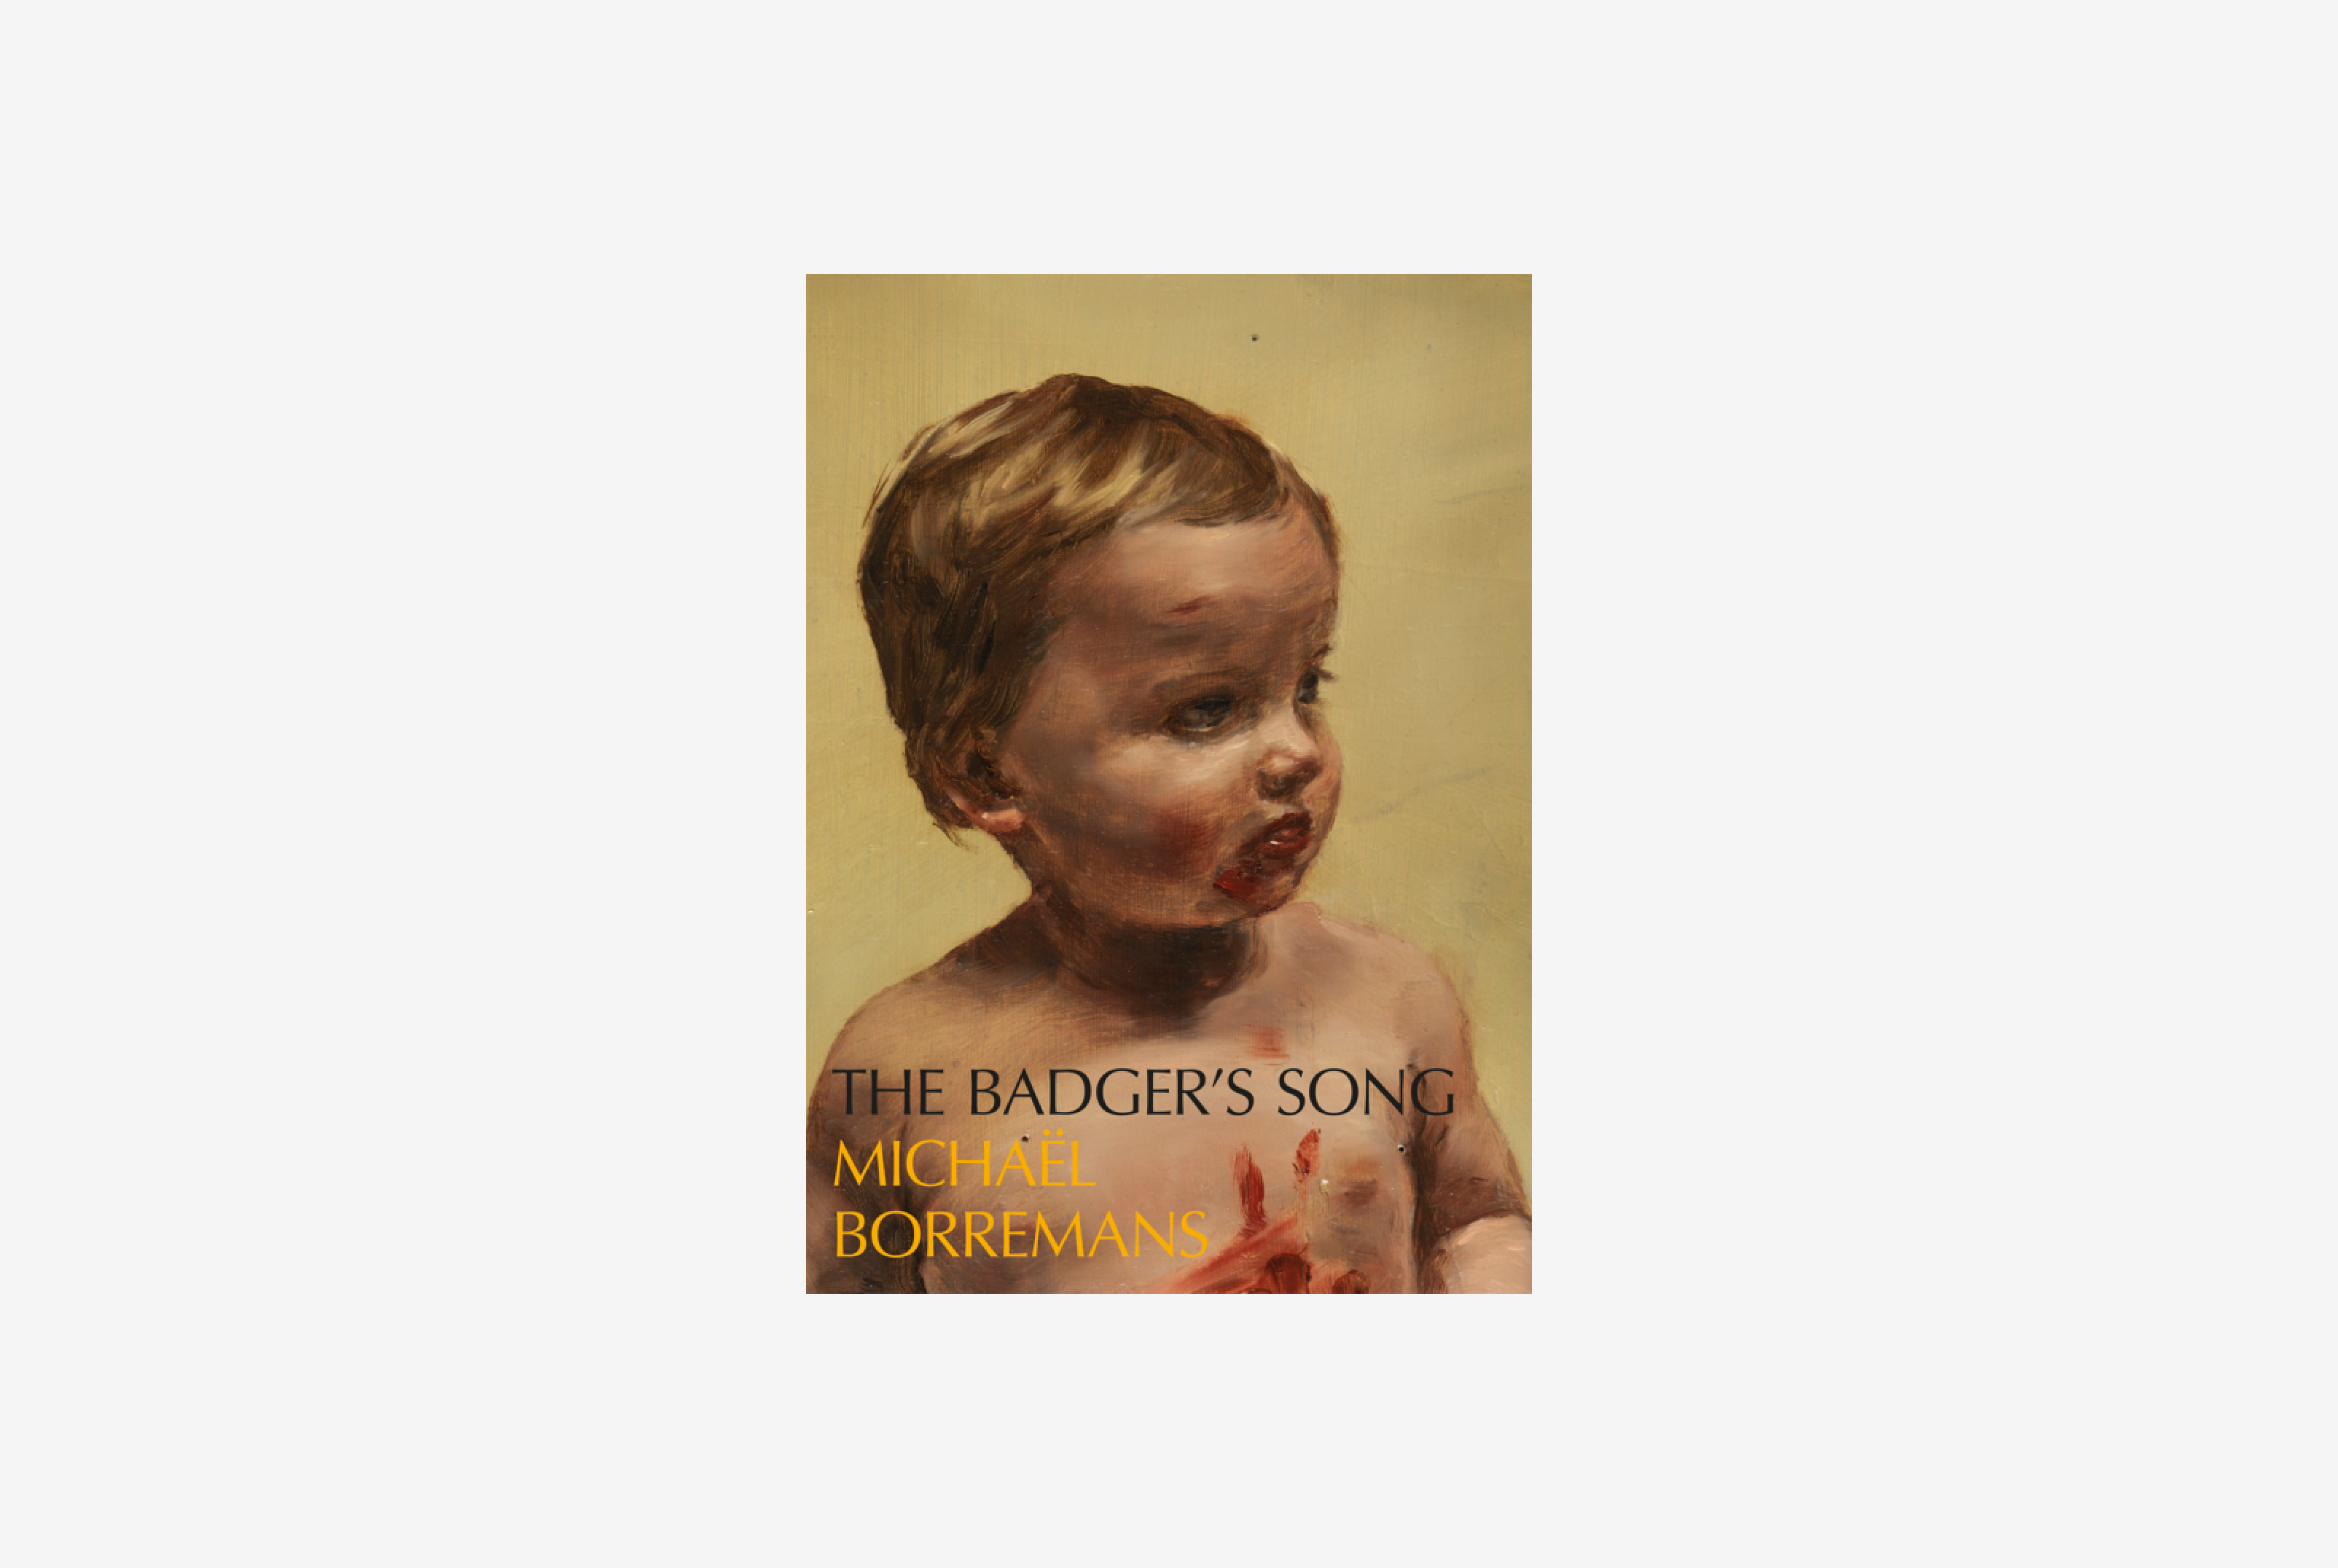 The cover of a book, titled Michaël Borremans: Badger’s Song, published by Hannibal Books and Franz König Books in 2020.